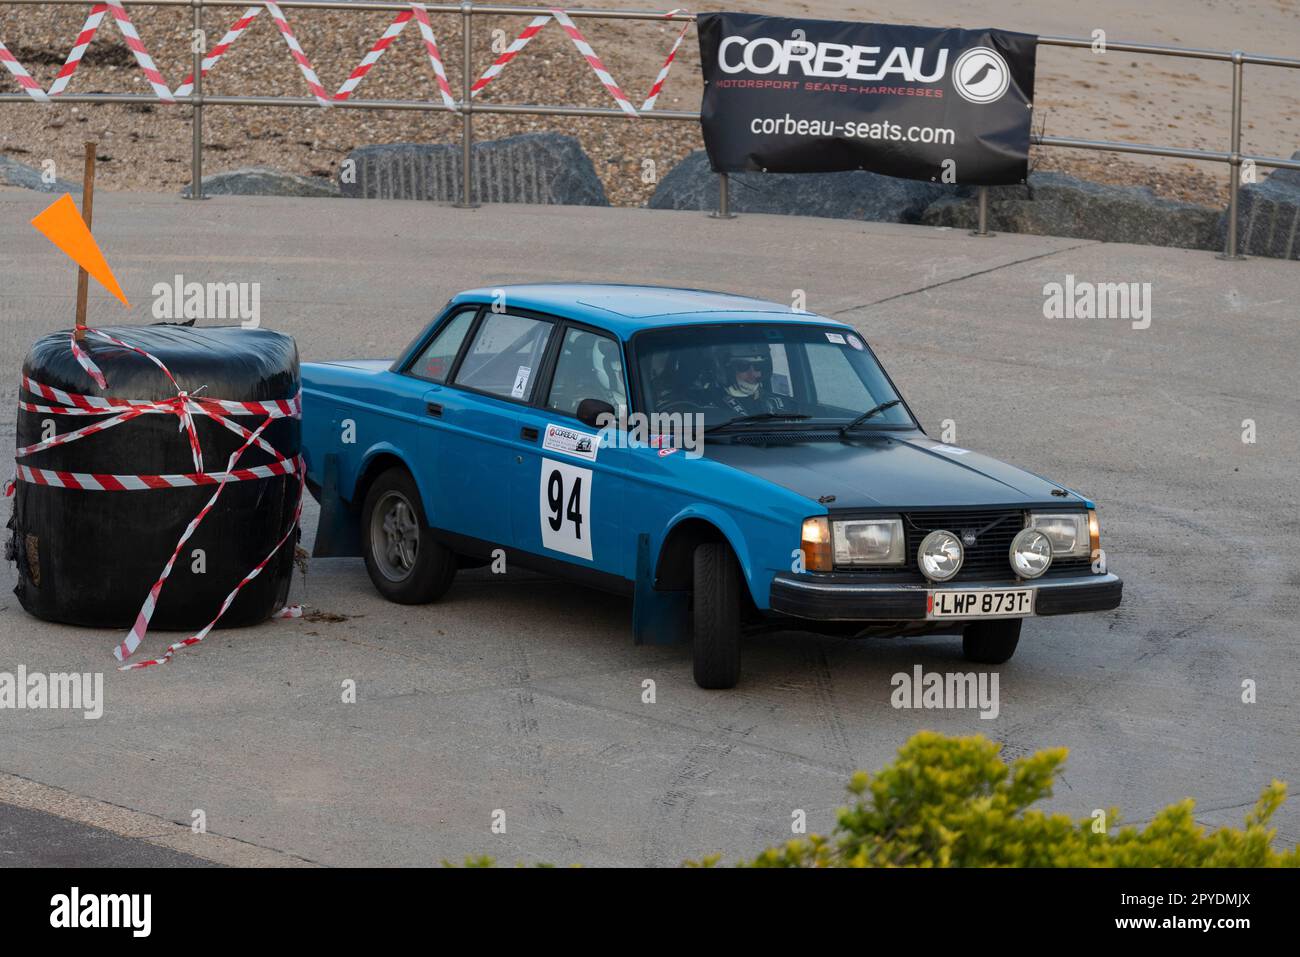 Darrell Denning racing a classic 1979 Volvo 244 competing in the Corbeau Seats rally on the seafront at Clacton, Essex, UK. Co driver Zak Linham Stock Photo